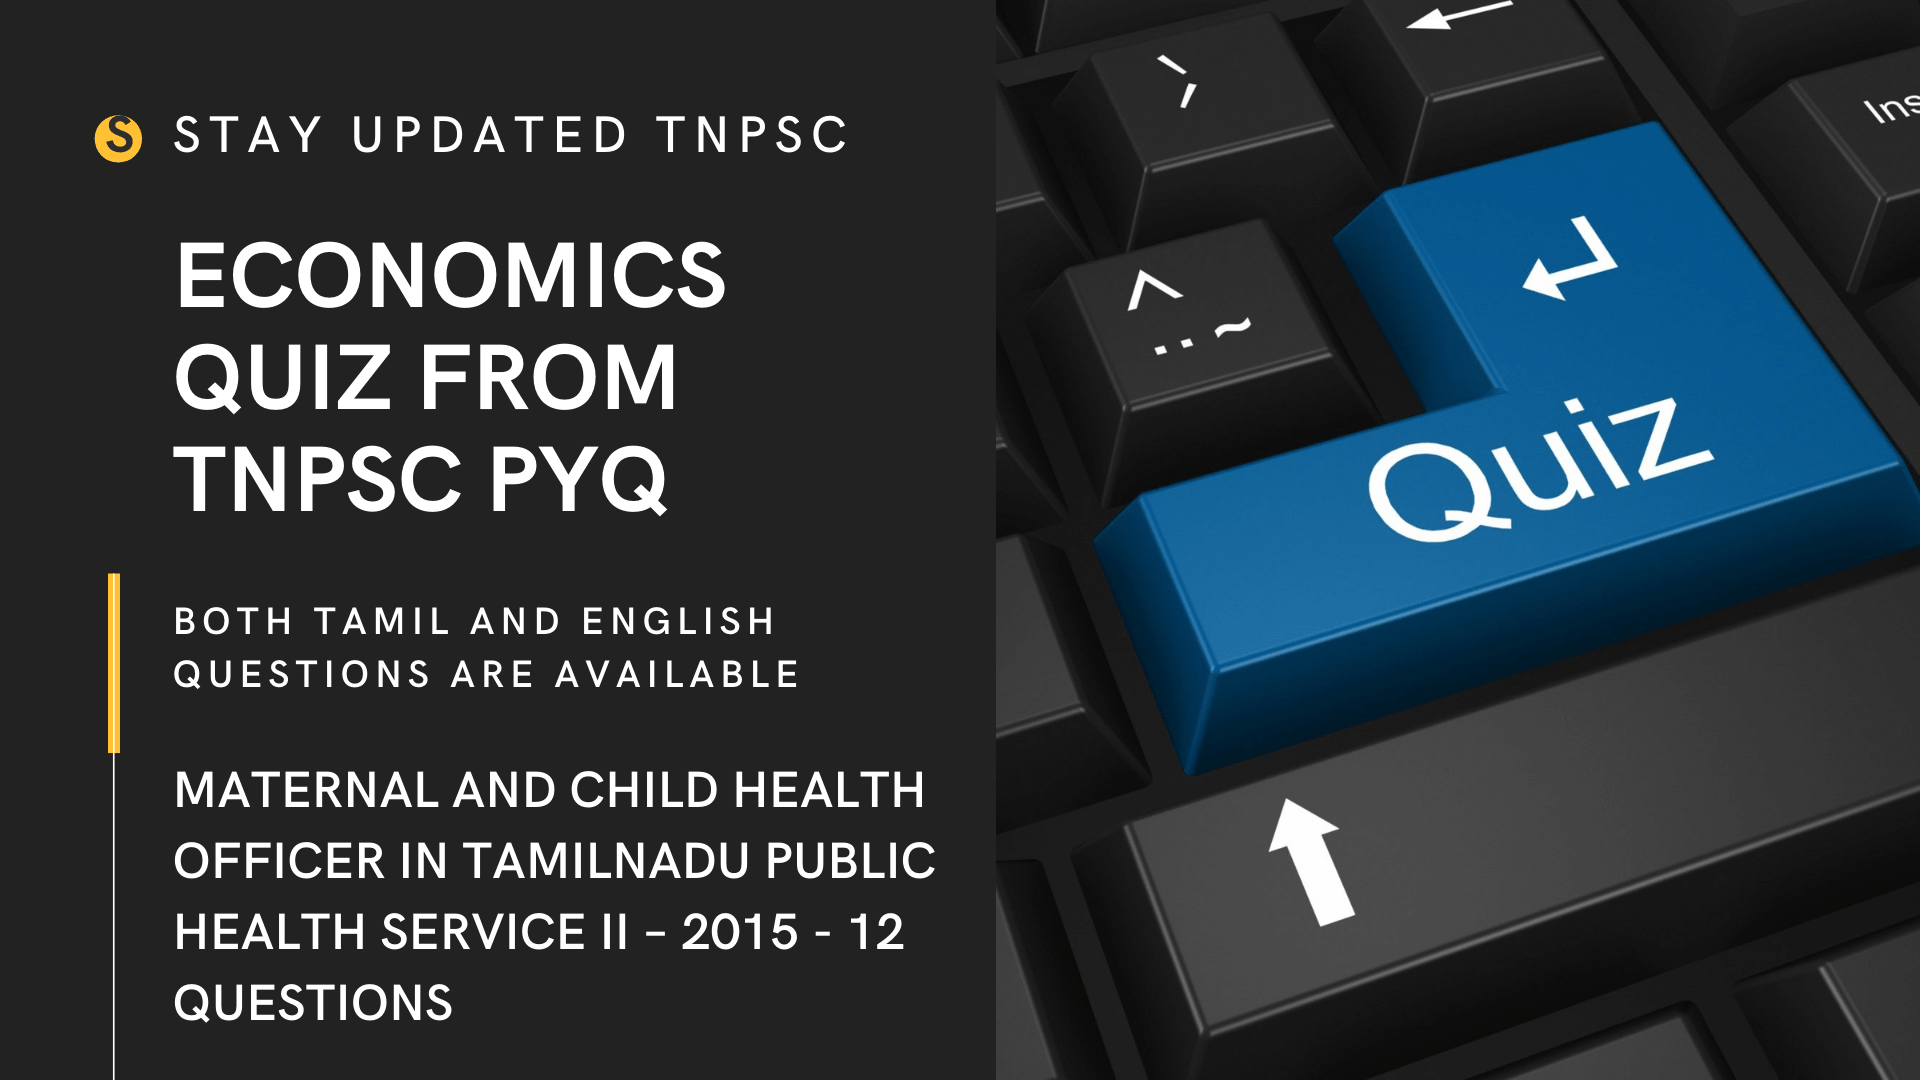 ECONOMICS QUESTIONS FROM TNPSC PREVIOUS YEAR QUESTION PAPER IN BOTH TAMIL AND ENGLISH MATERNAL AND CHILD HEALTH OFFICER IN TAMILNADU PUBLIC HEALTH SERVICE II – 2015